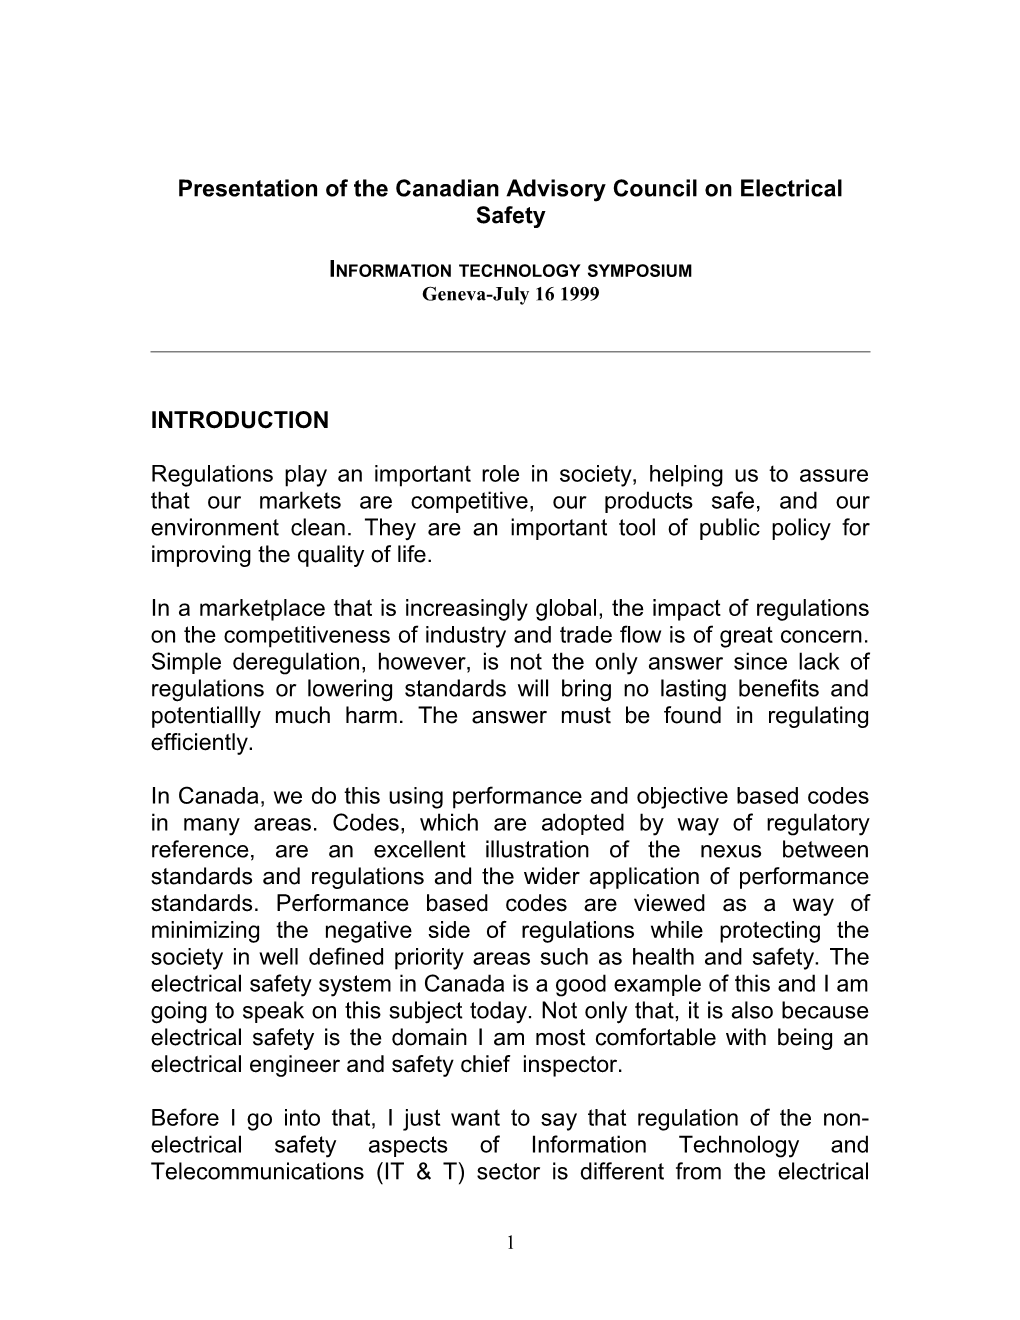 Presentation of the Canadian Advisory Council on Electrical Safety